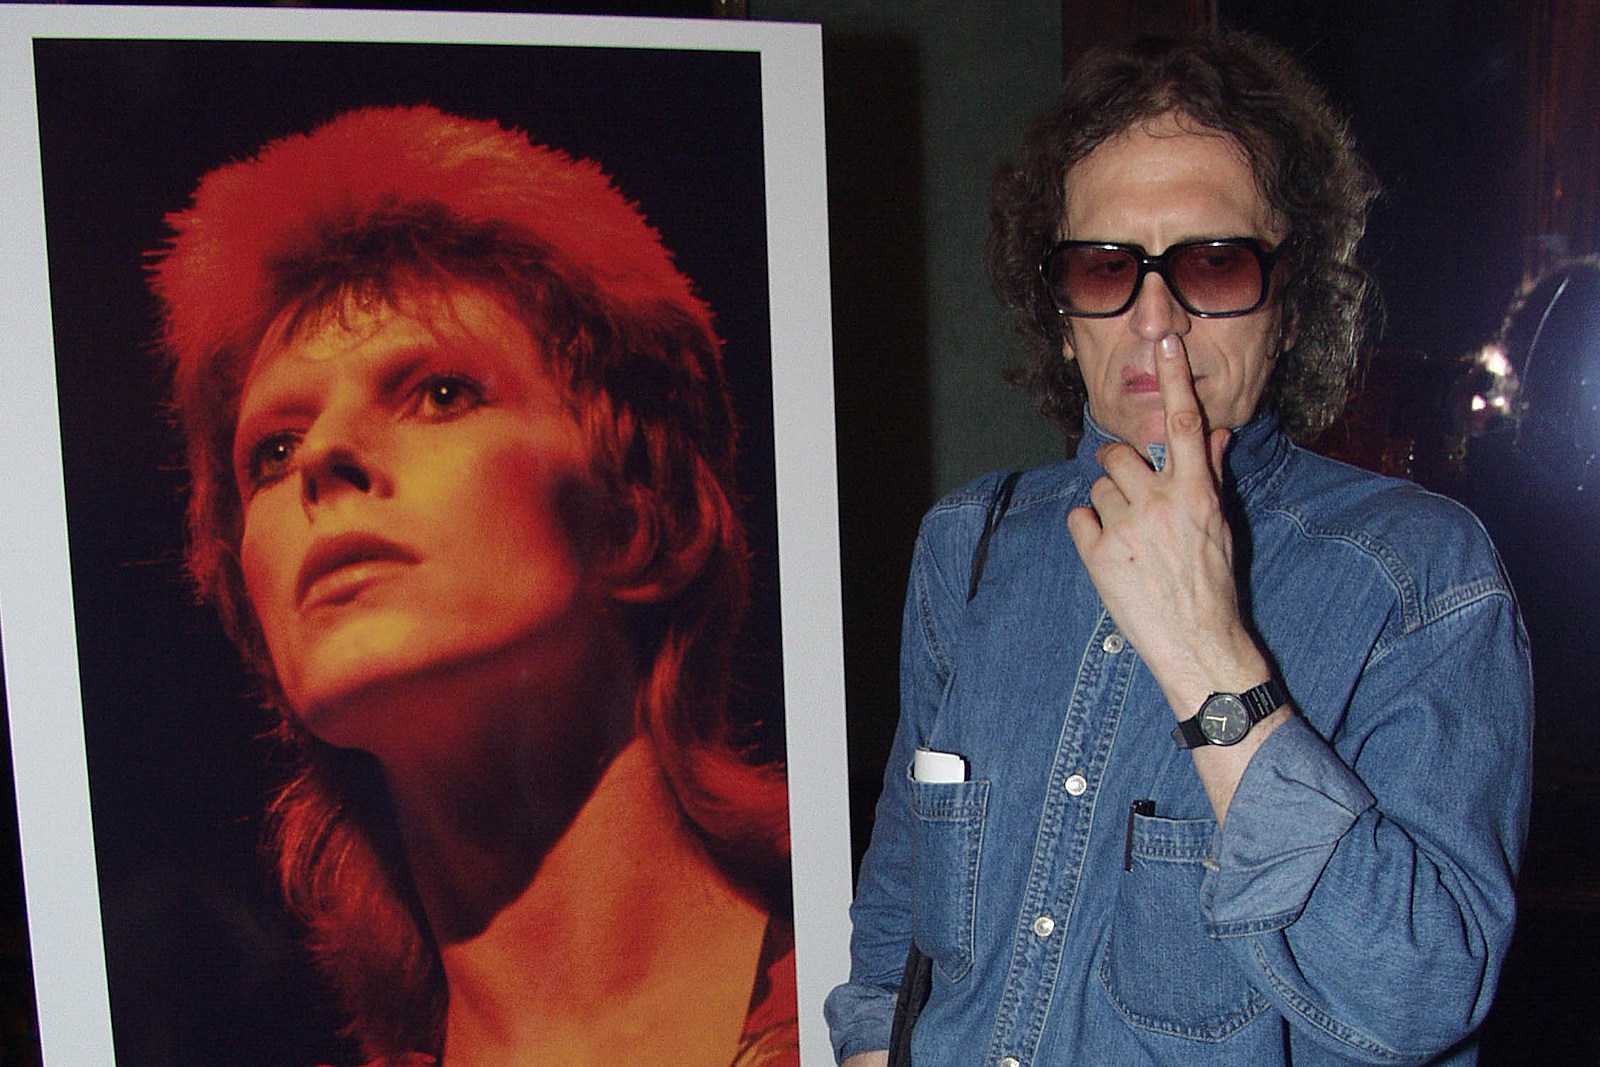 Mick Rock, Acclaimed Music Photographer, Dead at 72